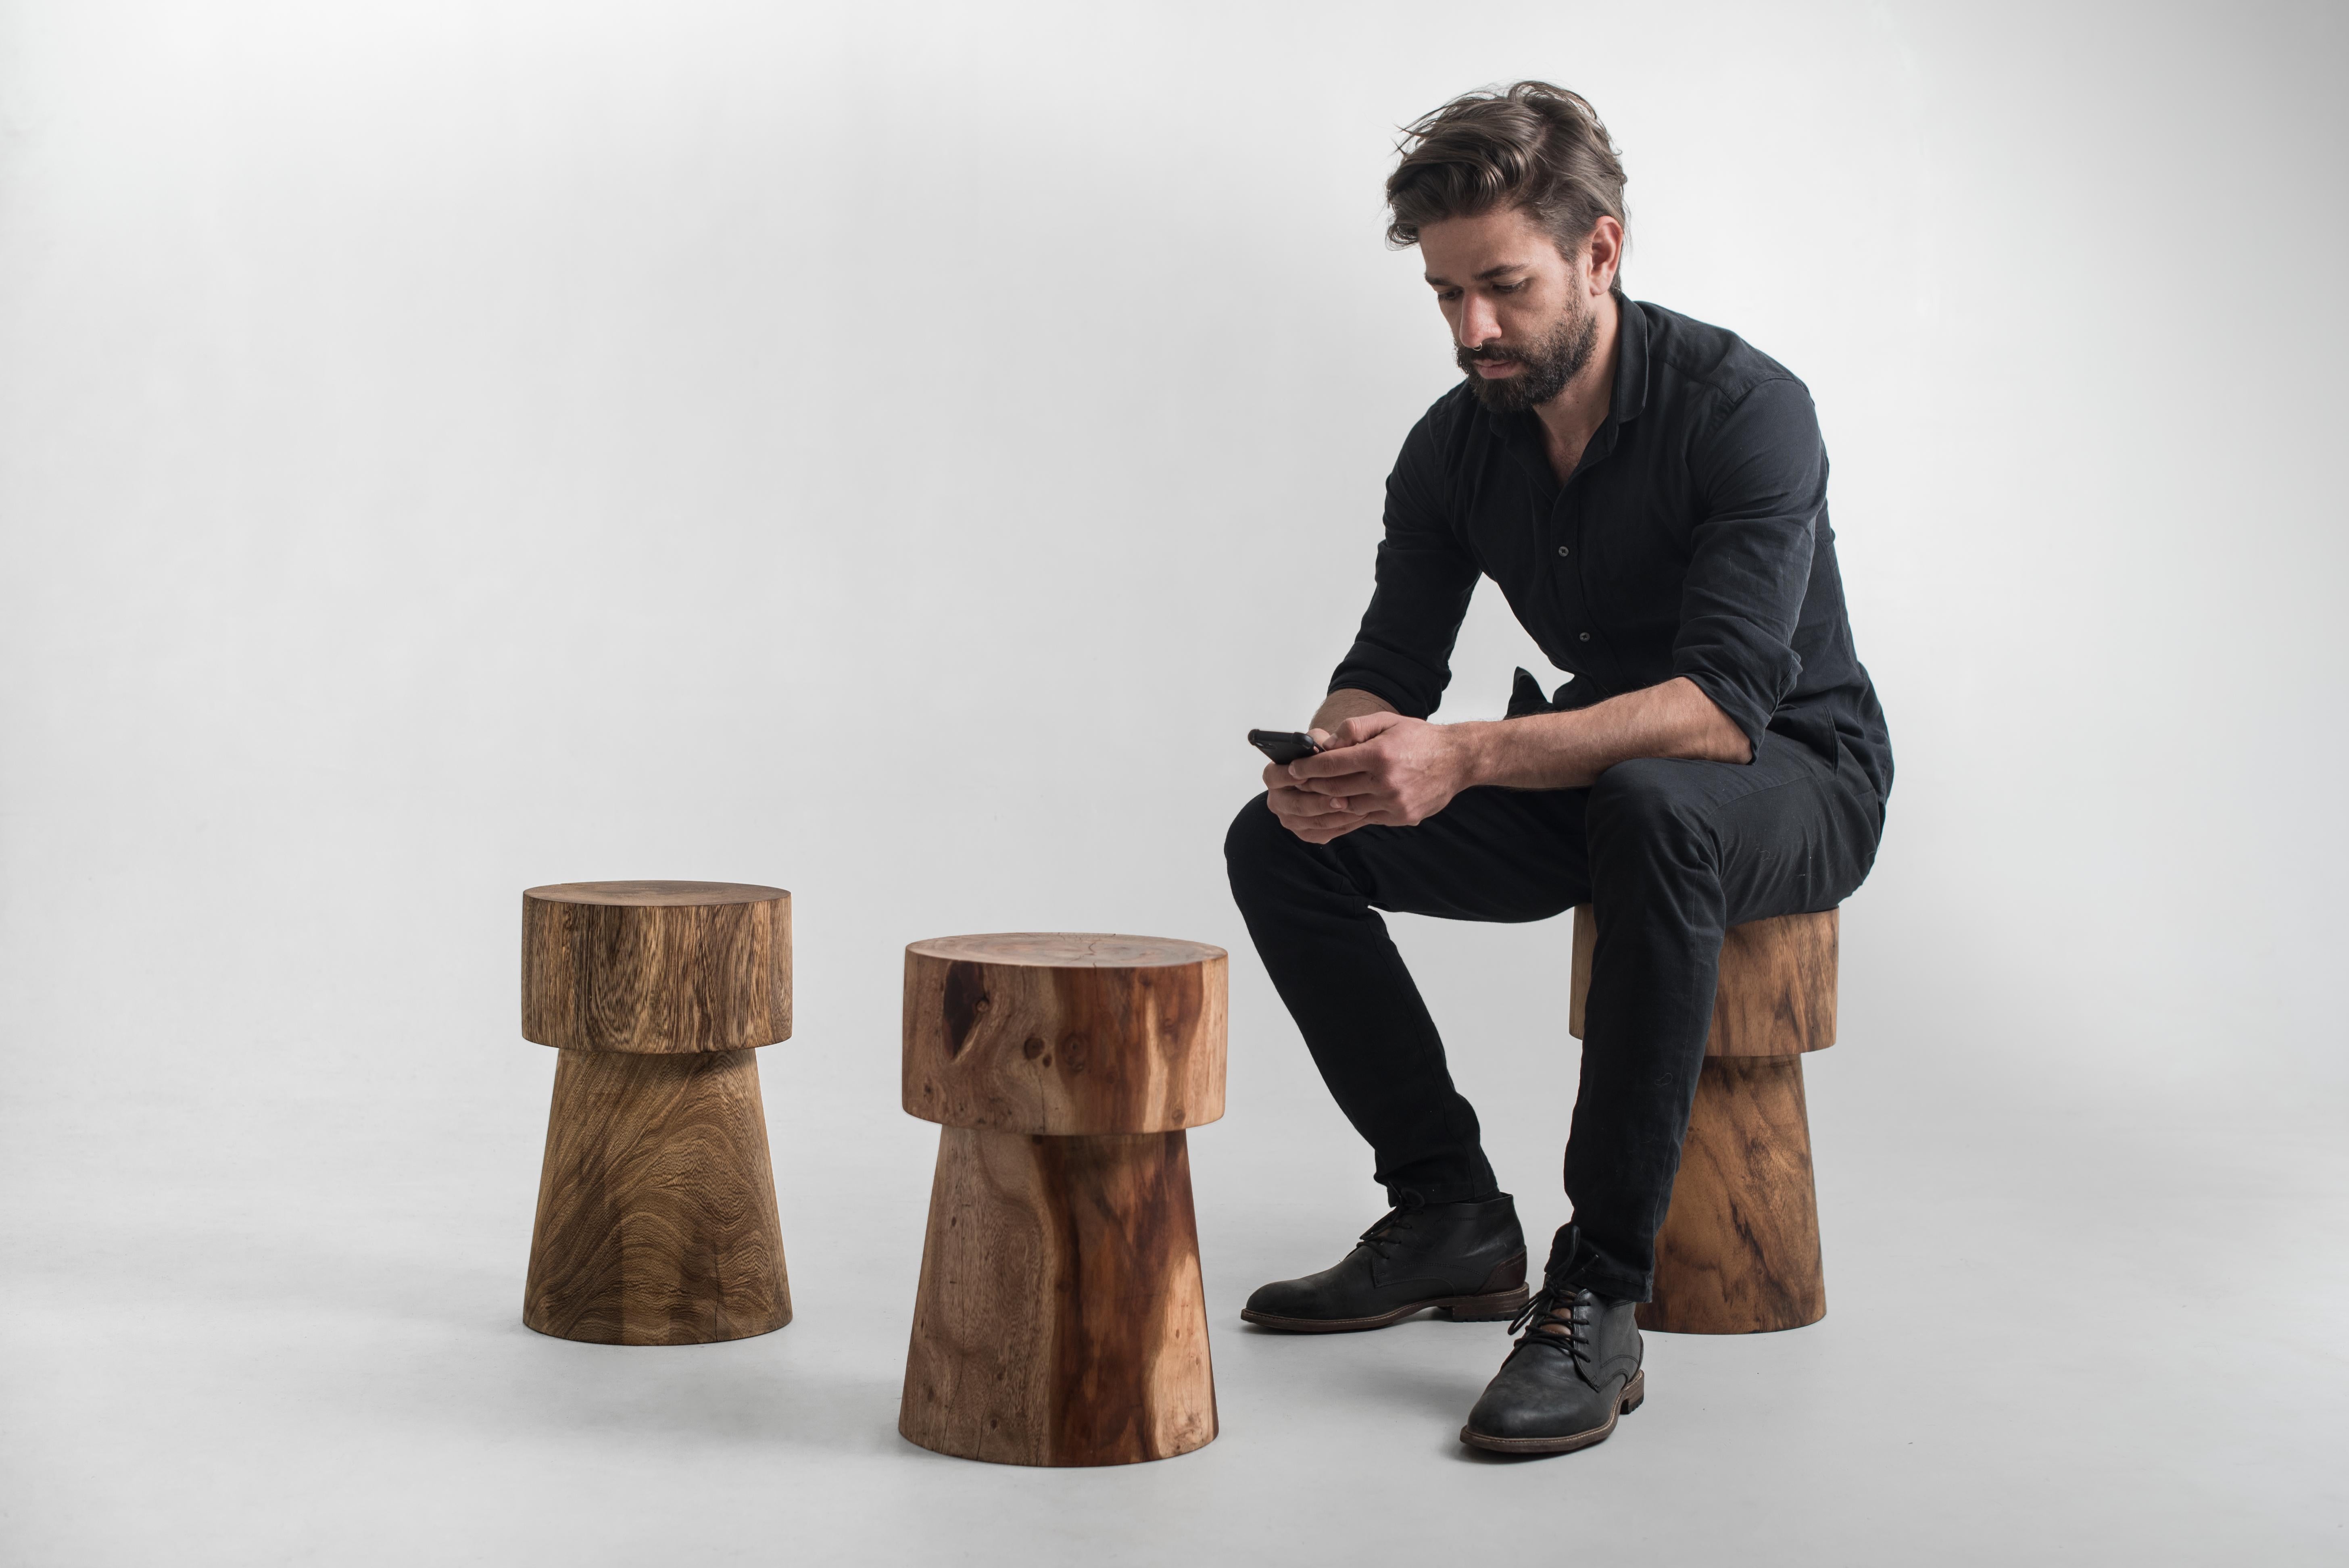 Potro Stools are inspired by the sturdy anatomy of horses and their role in Mexican culture. 

The stools are woodturned in highly resistant parota wood, by the Ramírez Family in San Juan de Abajo, Nayarit; using certified local solid wood. Parota